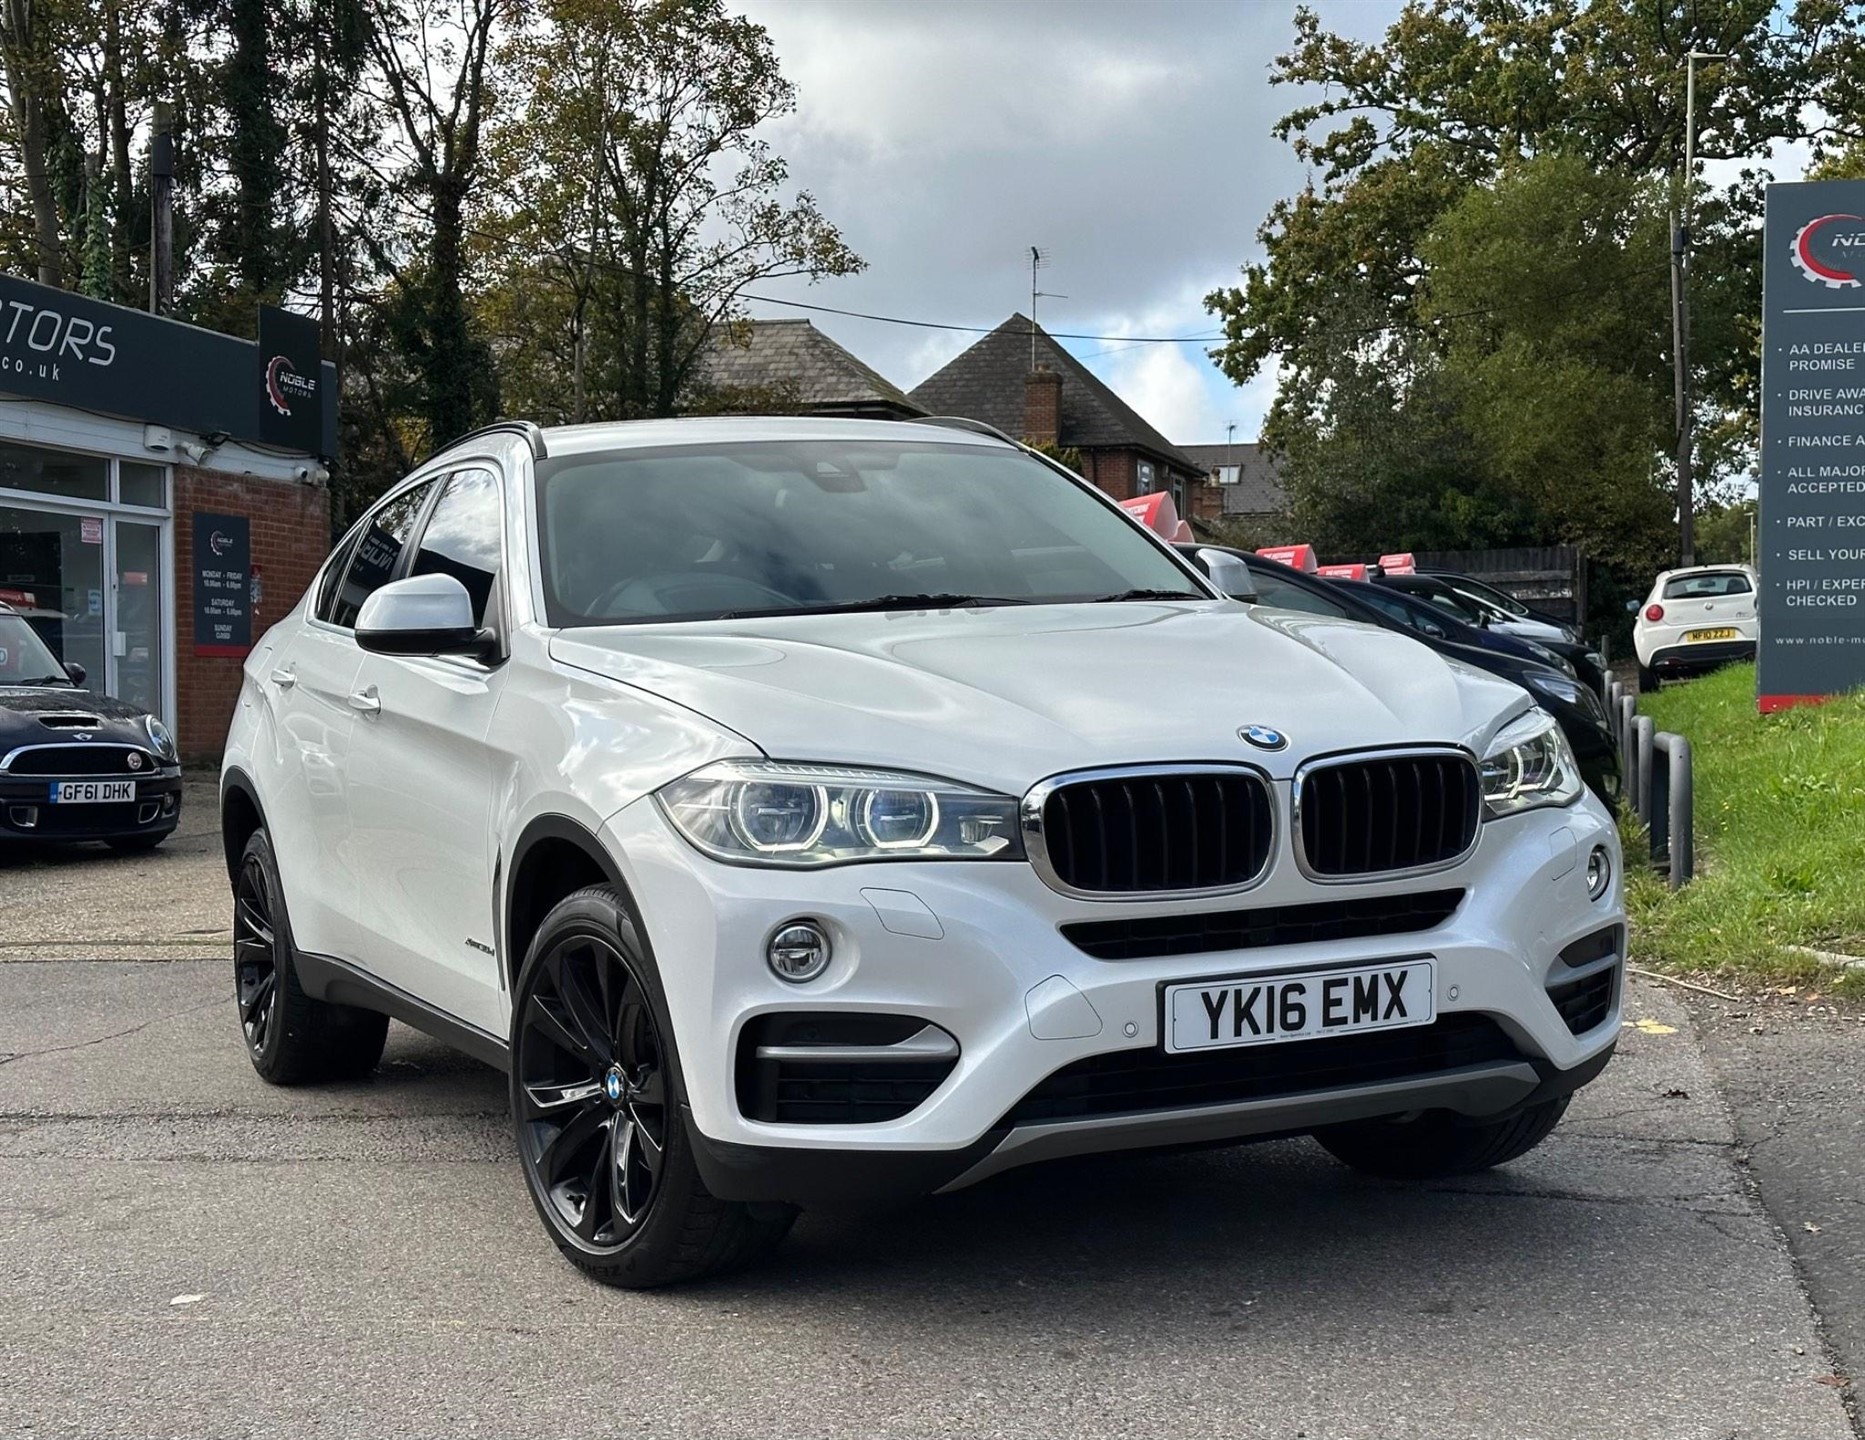 Used BMW X6 for sale in Hook, Hampshire